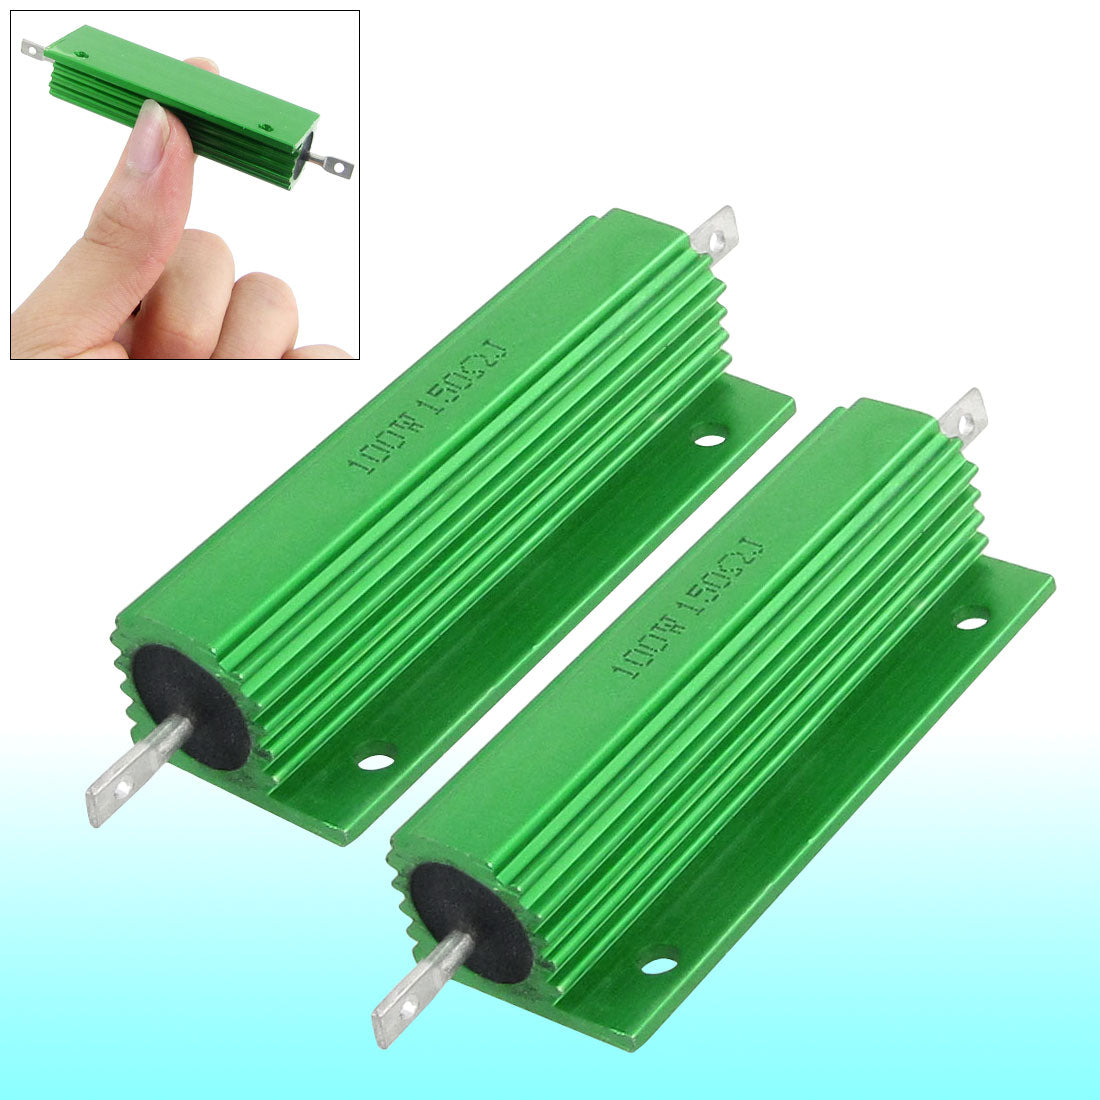 uxcell Uxcell 2 Pcs Green Aluminum Housed 100W Power Rating 5% 150 Ohm Resistors Resistance